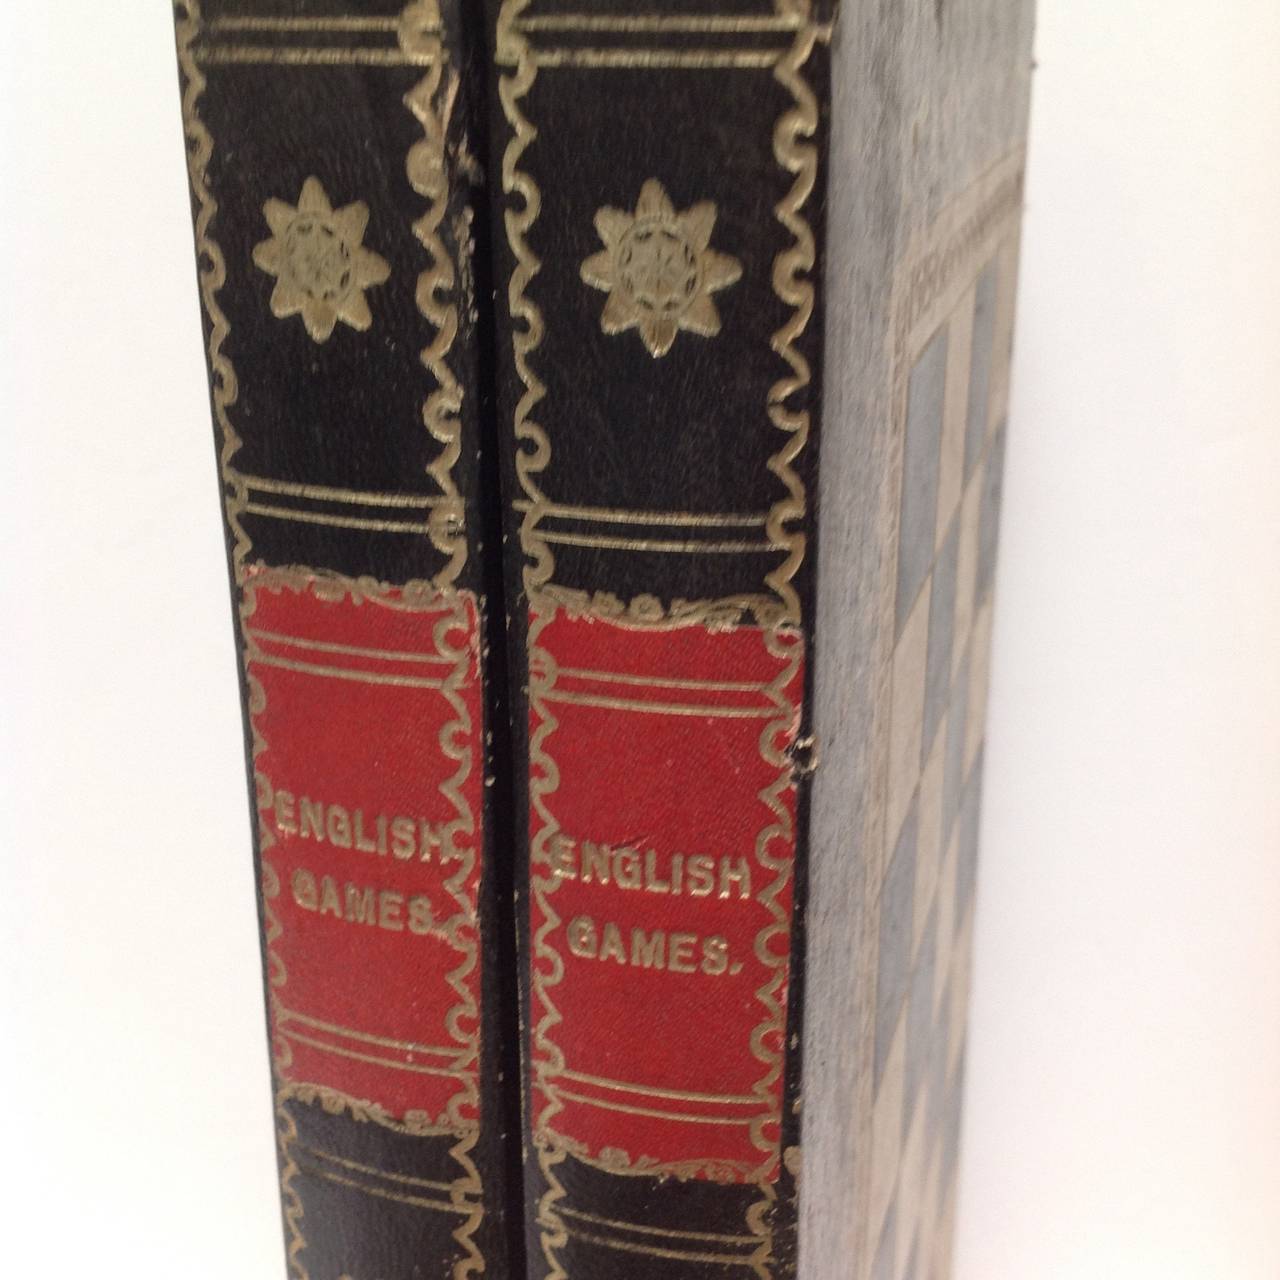 Leather and paper covered folding game board/box with chess and checkers on the outside and backgammon inside with a great overall book design. The spine reads English games Vol 1 Vol 2, early 20th century.